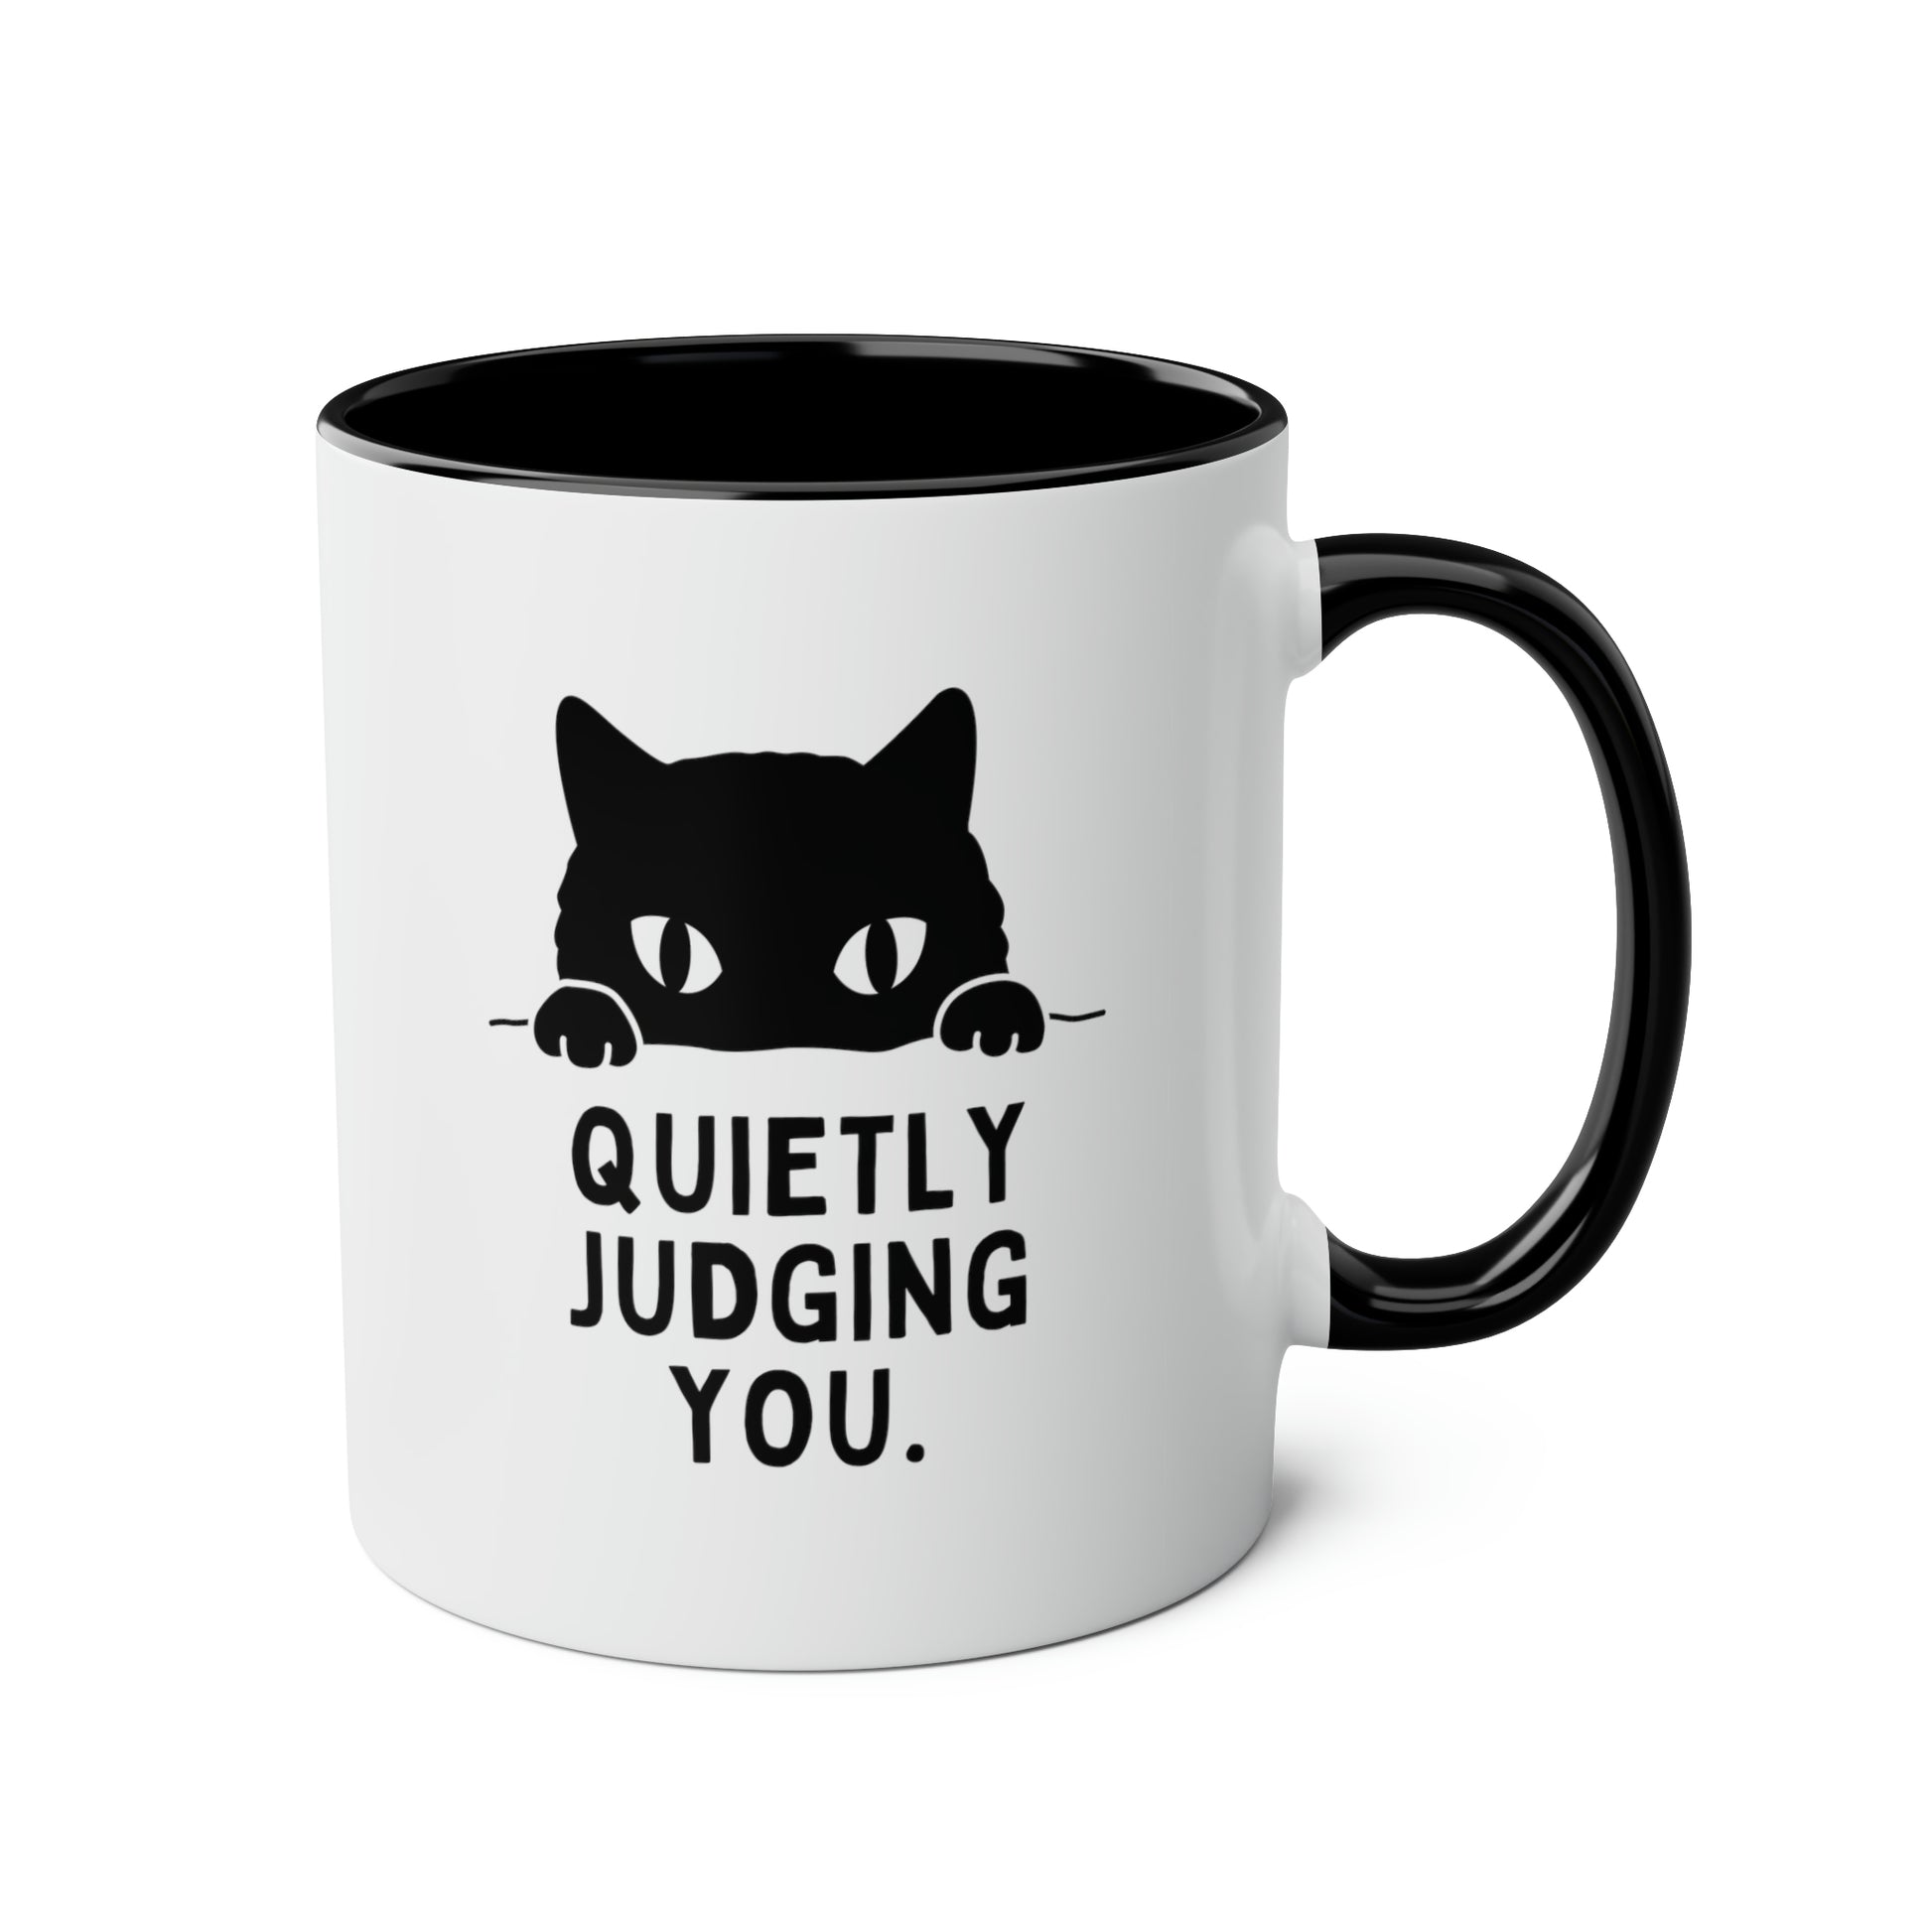 Quietly Judging You 11oz white with black accent funny large coffee mug gift for cat mom cute peeking sarcastic quote tea cup feline lover waveywares wavey wares wavywares wavy wares